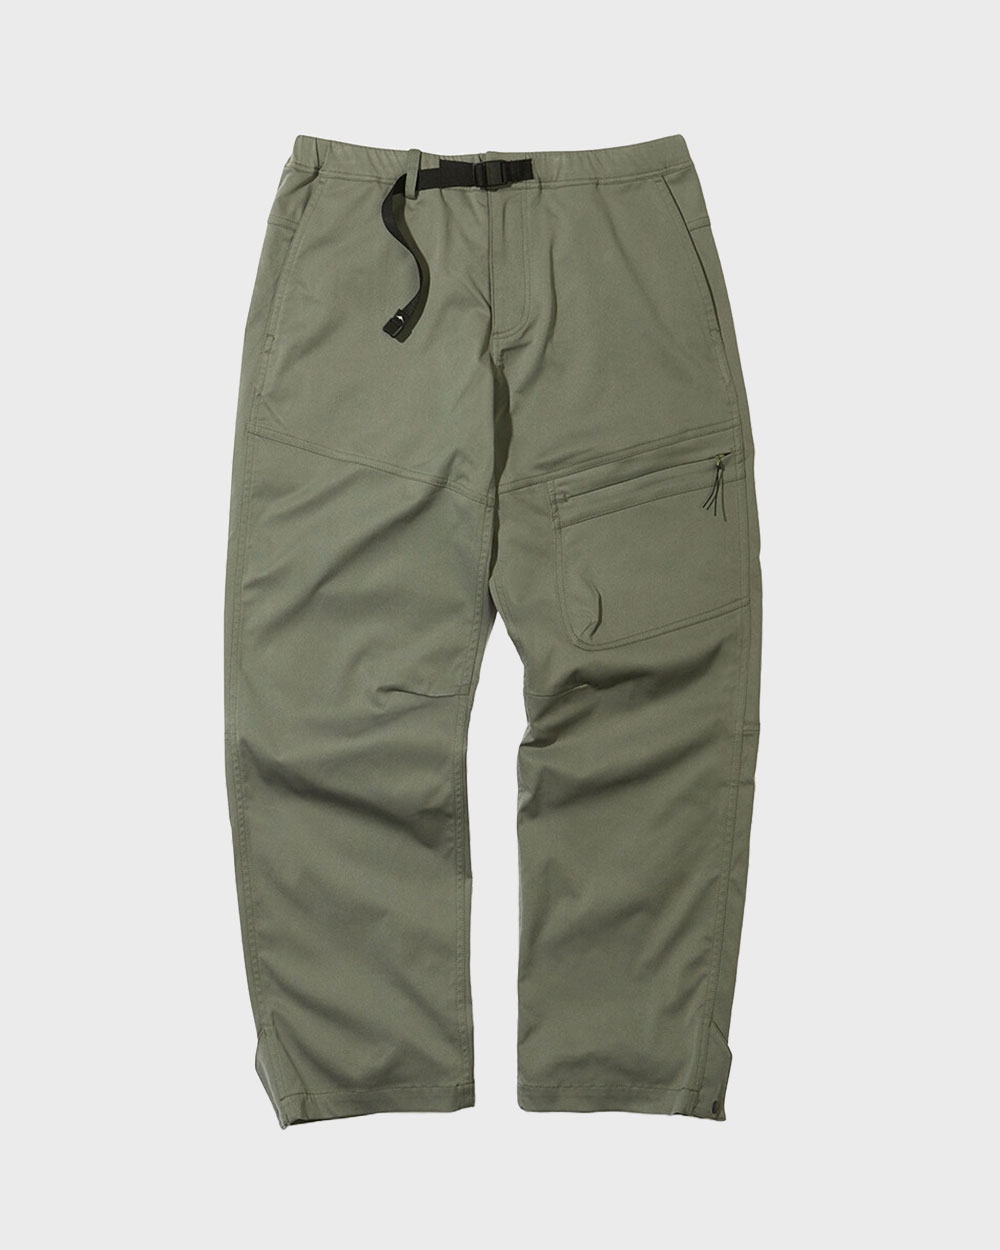 Stander Twill Pants (Olive)